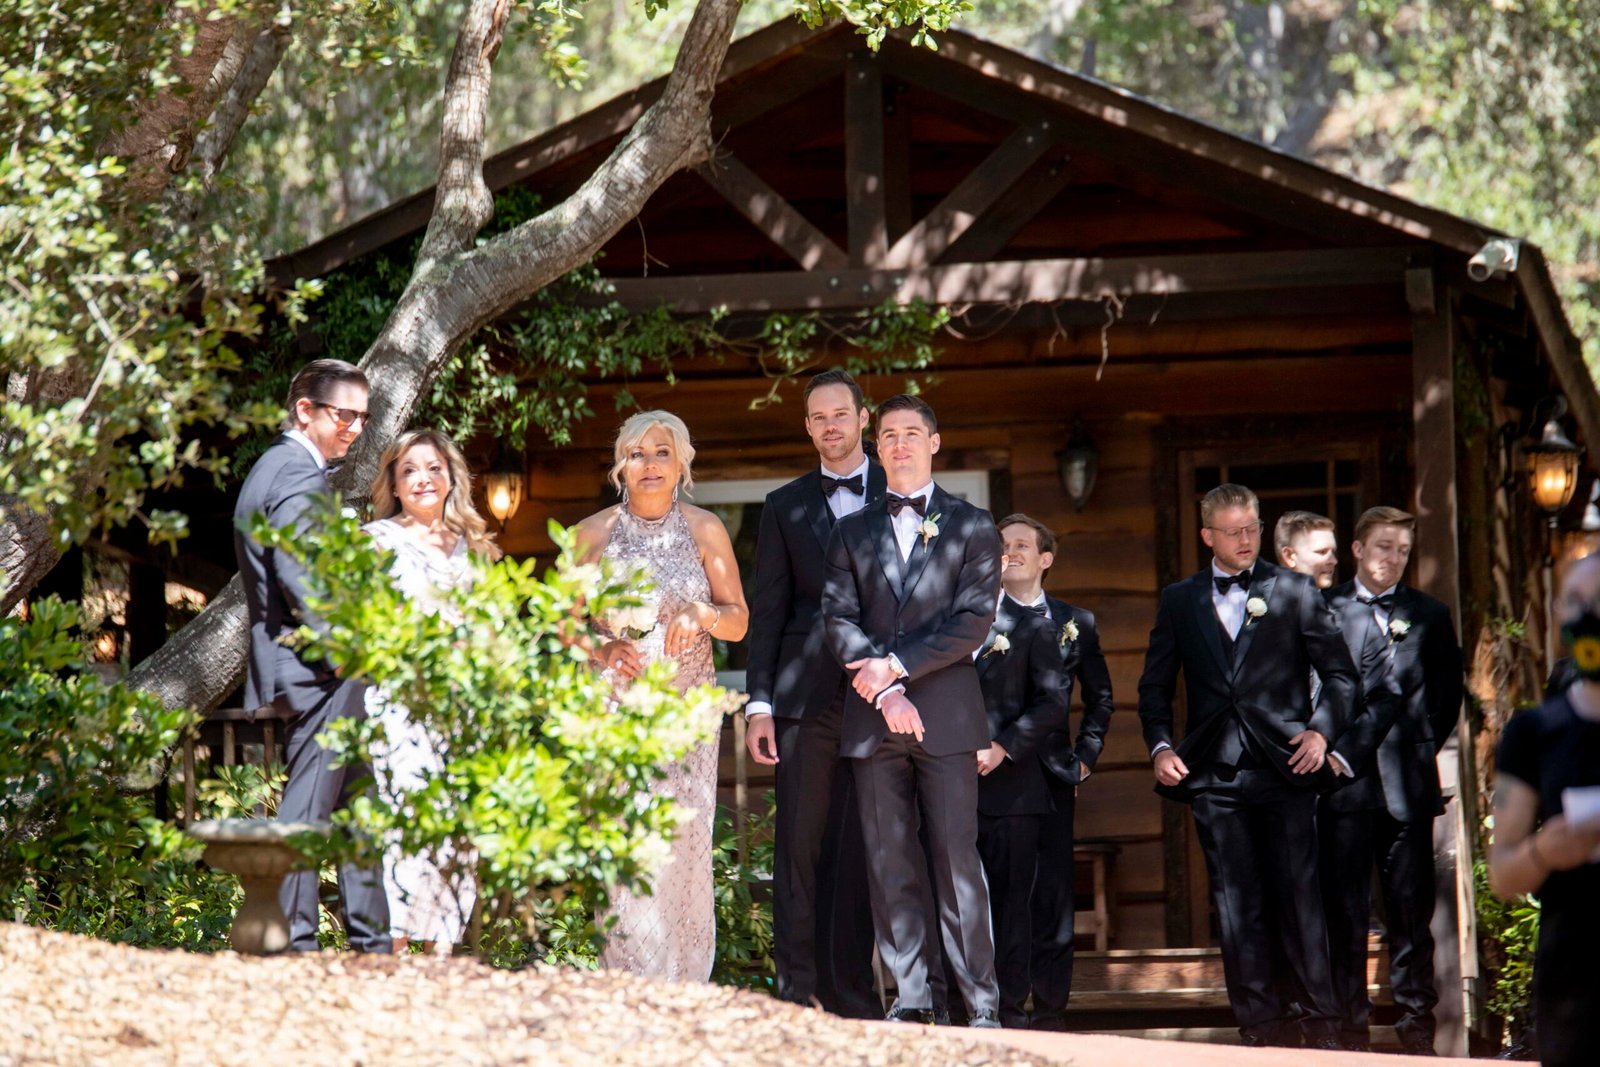 groom with family and groomsmen waiting to walk down the aisle